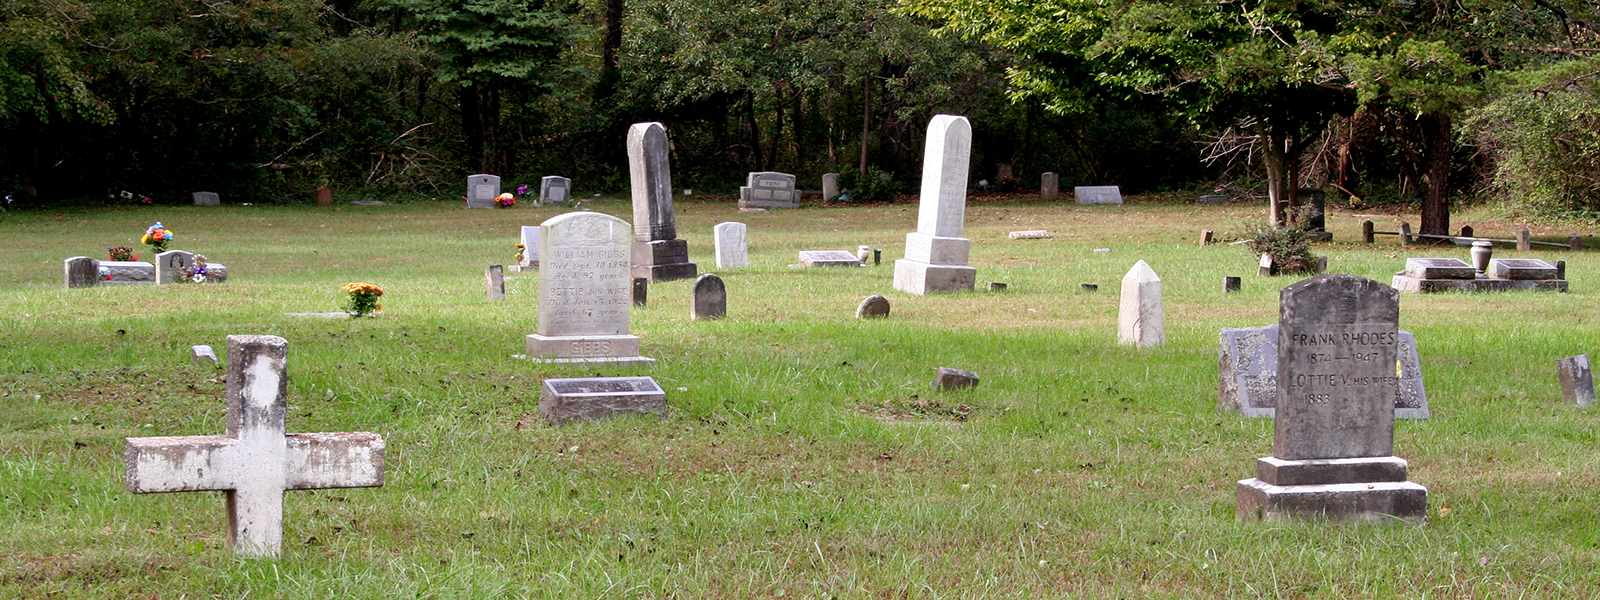 Wide angle view of a cemetery